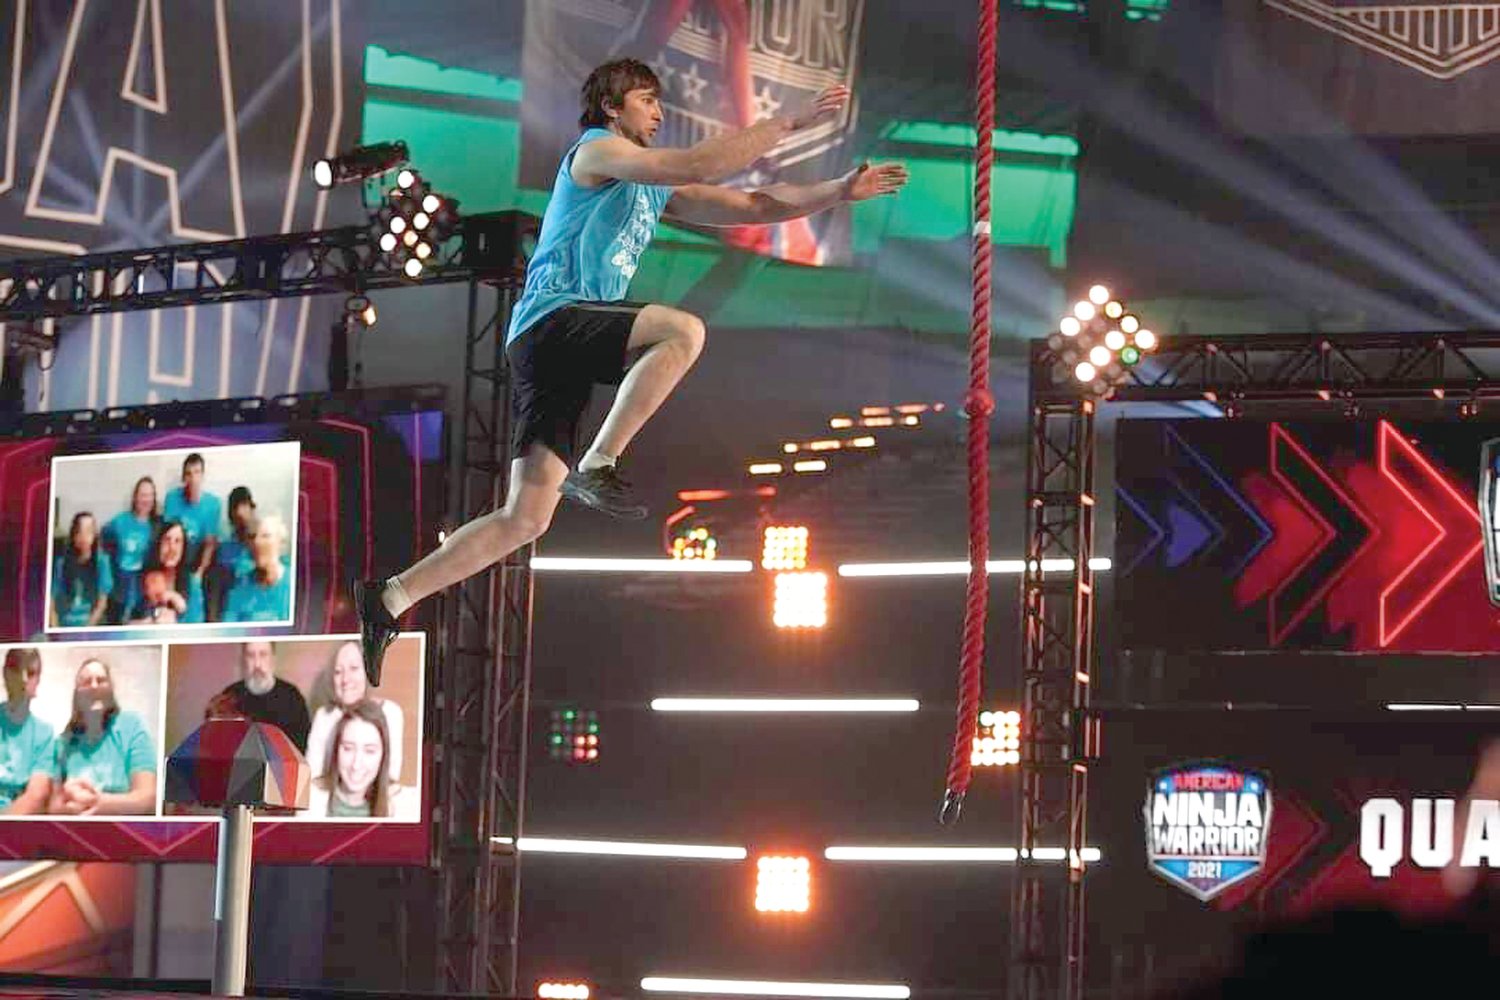 Mountain Grove’s Caleb Dowden leaps for the rope during an obstacle in the first round of the hit television show, American Ninja Warrior, while his family watches on in the background.